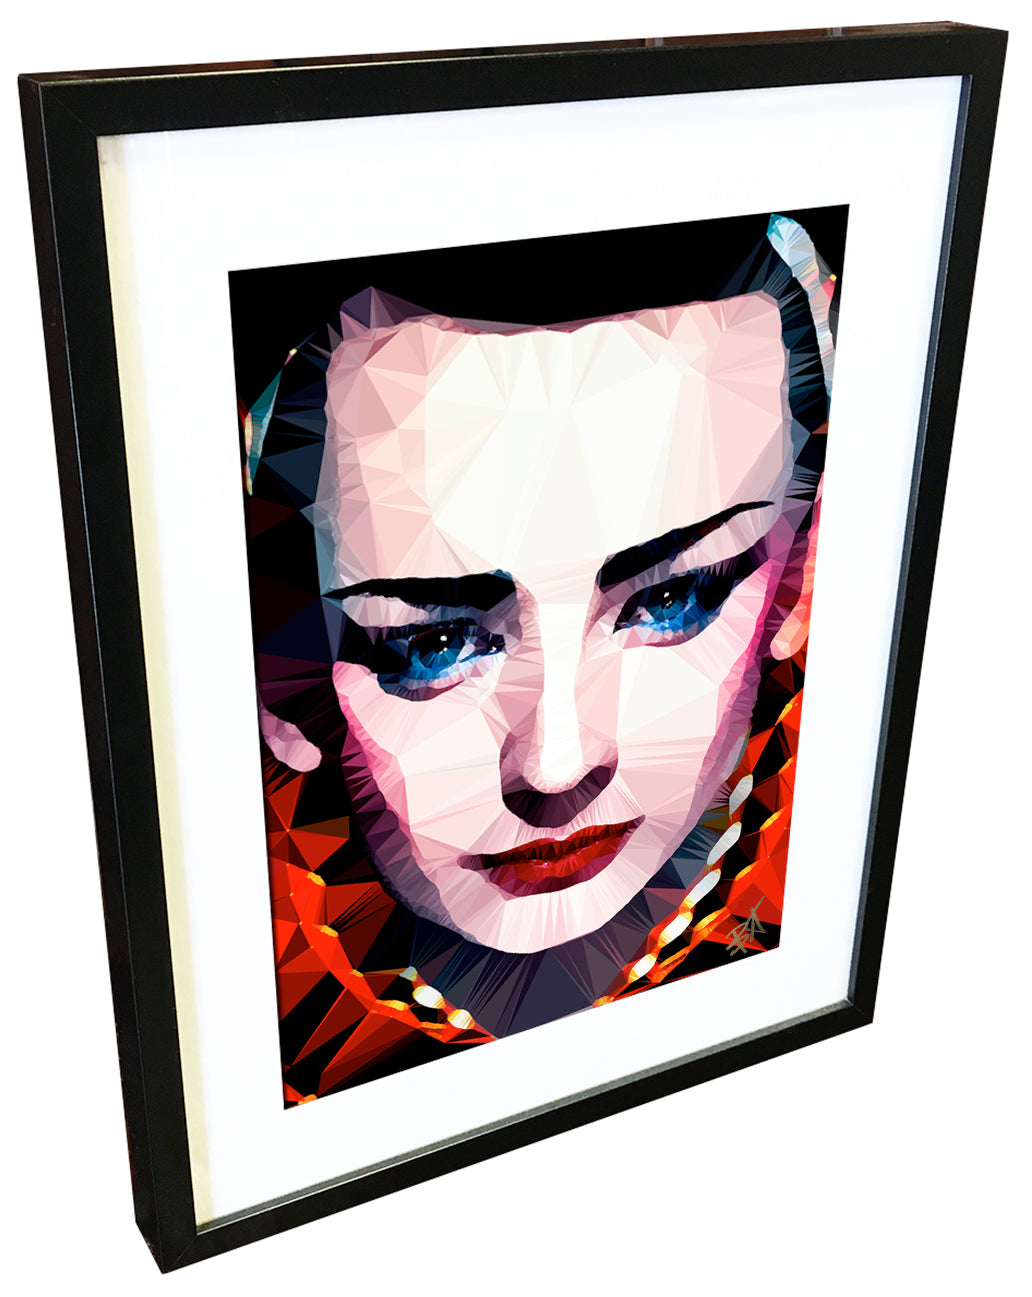 Boy George #1 by Baiba Auria - signed art print - Egoiste Gallery - Art Gallery in Manchester City Centre